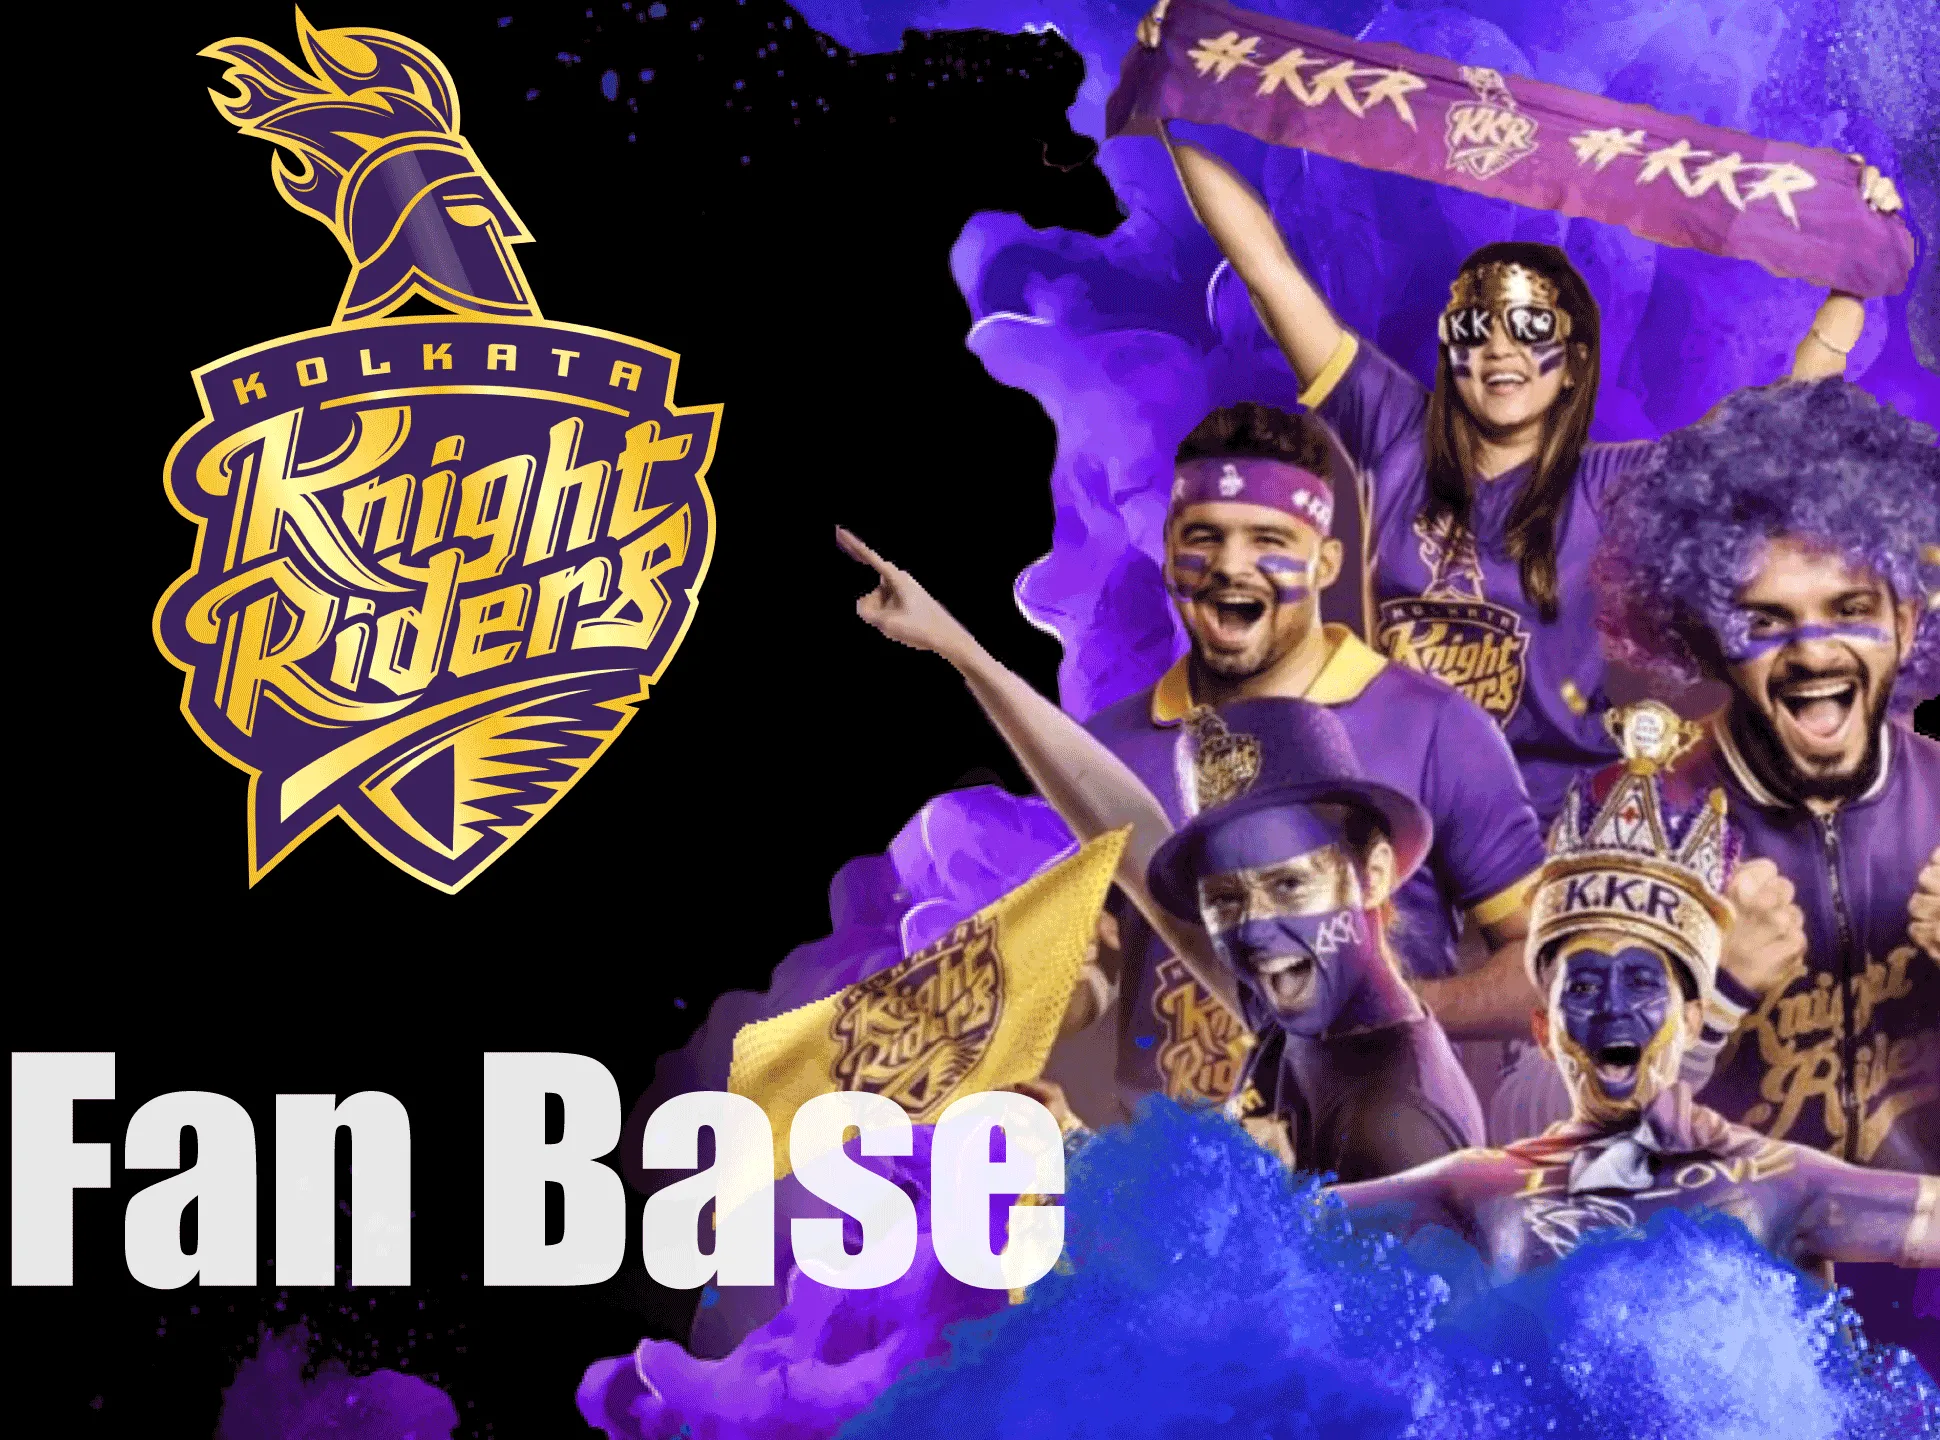 Lot of people around the India and other countries are fans of KKR.